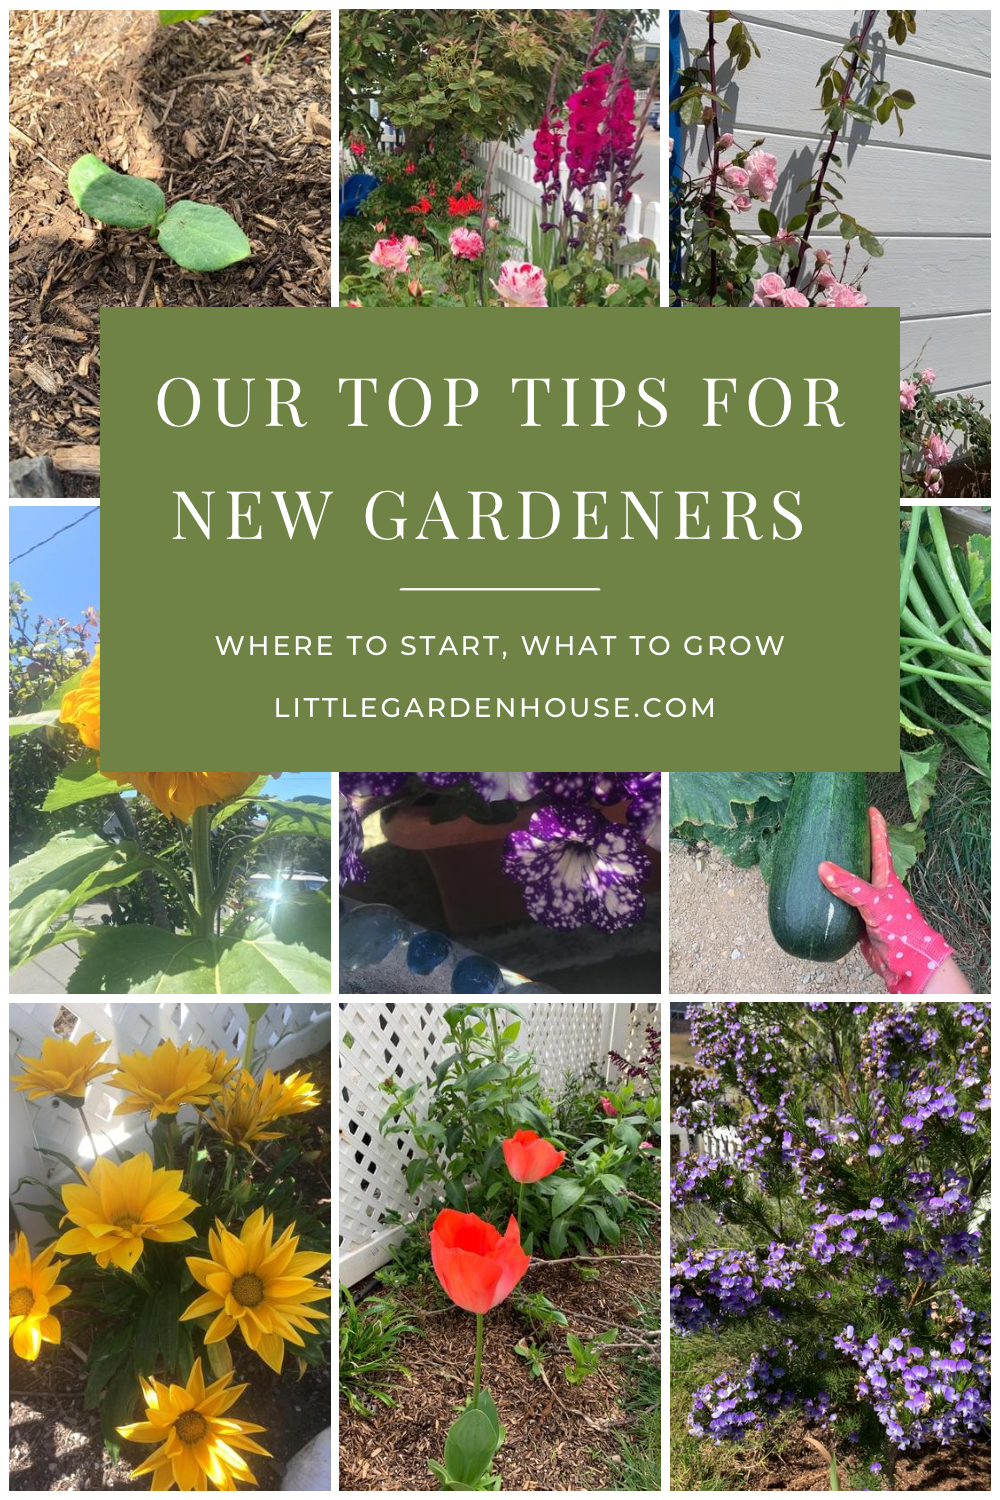 Our Top Tips for New Gardeners